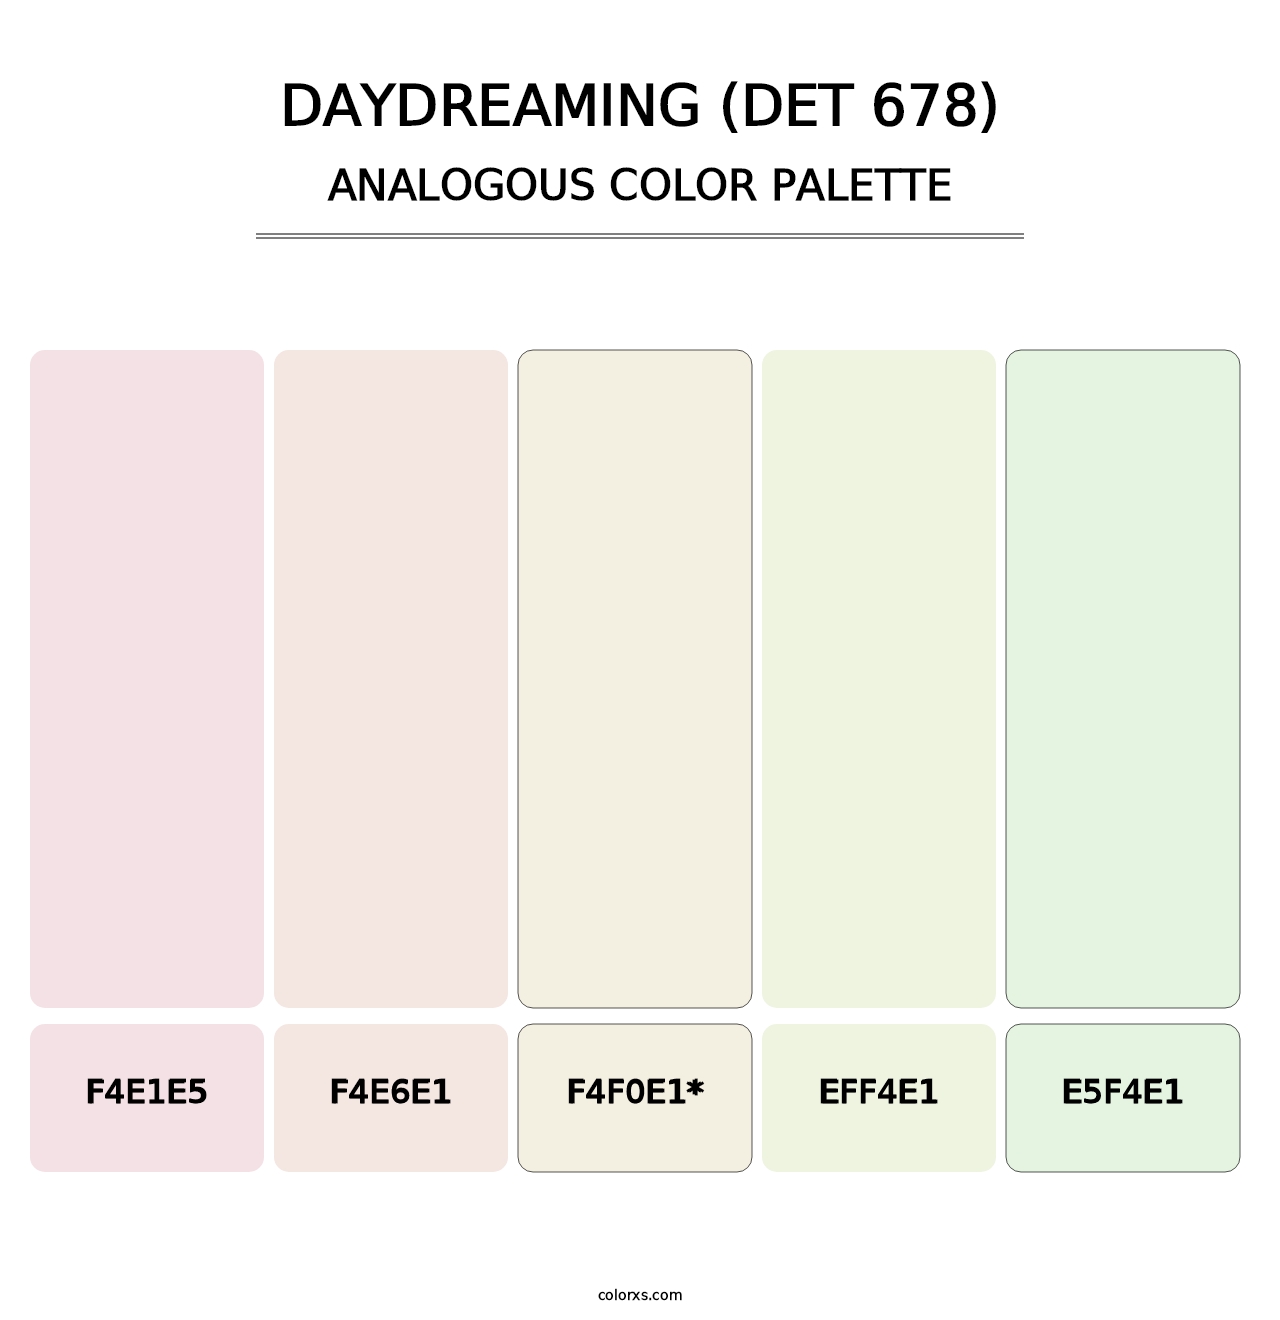 Daydreaming (DET 678) - Analogous Color Palette